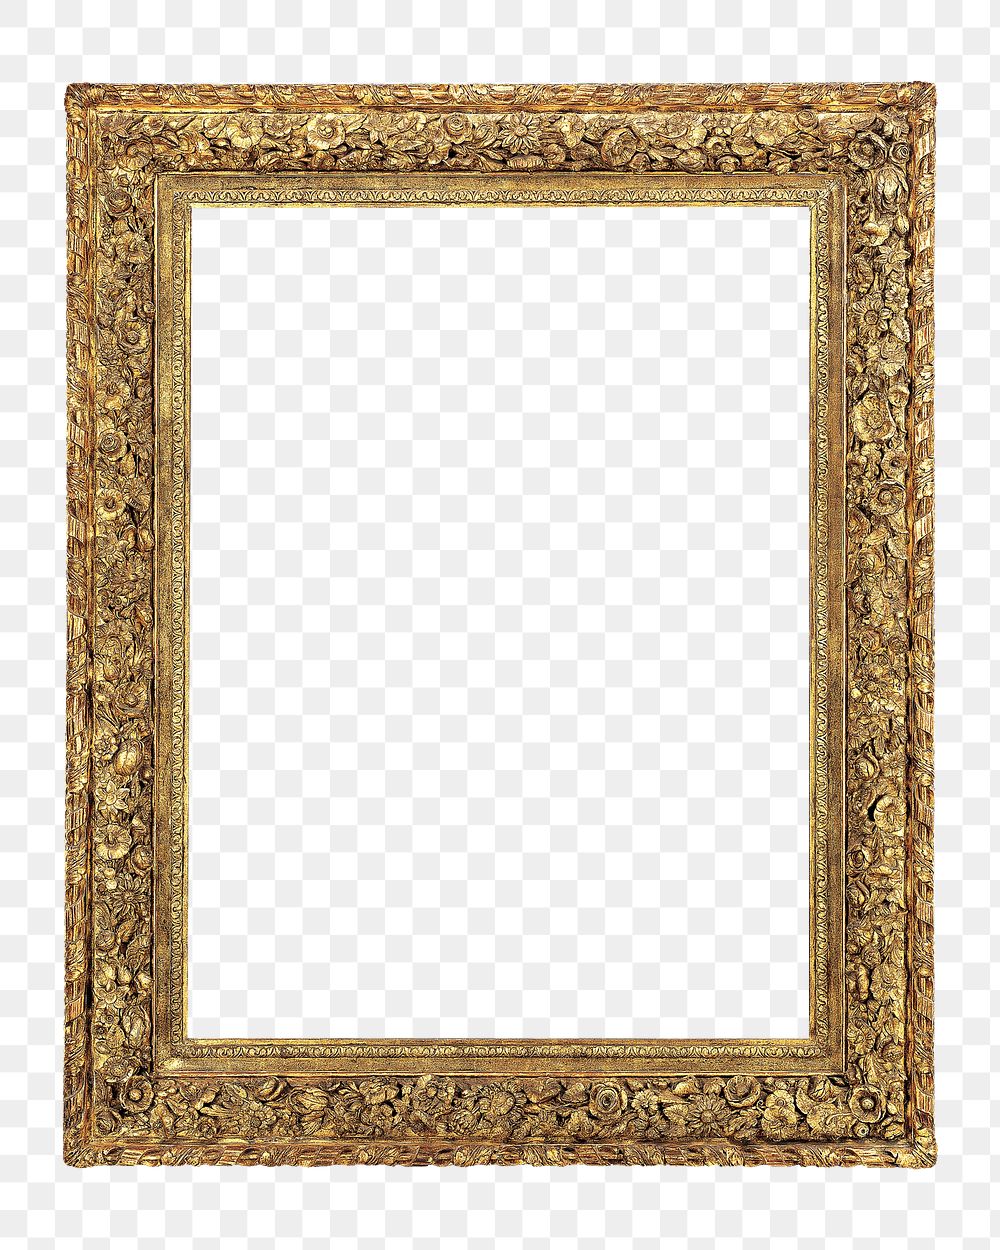 Circle Frame Png Clipart Picture Frames Clip Art - Round Vintage